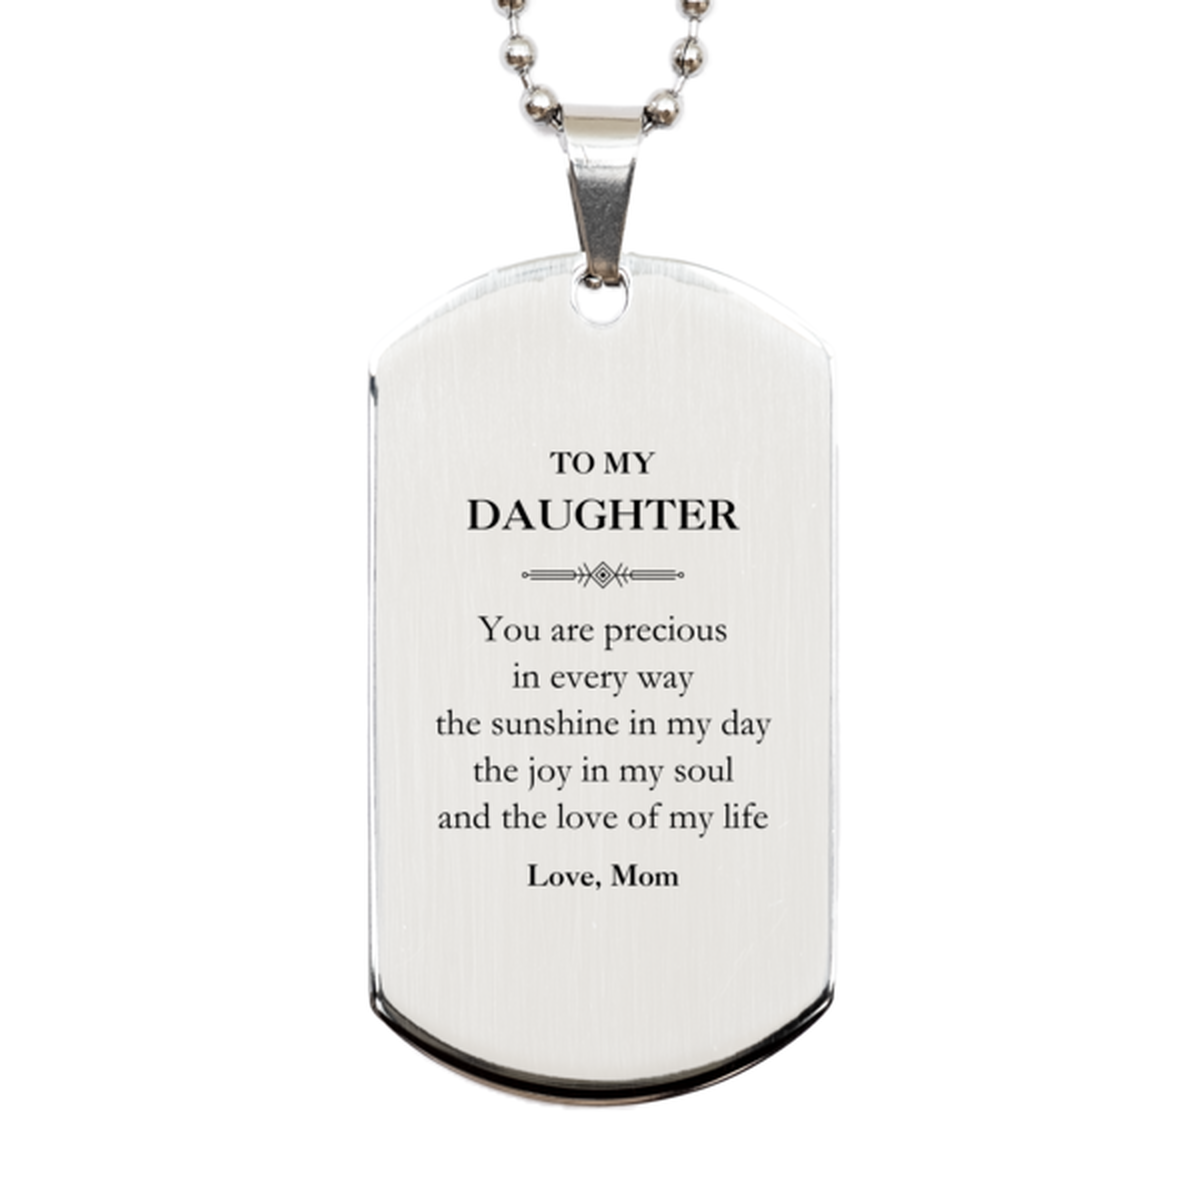 Graduation Gifts for Daughter Silver Dog Tag Present from Mom, Christmas Daughter Birthday Gifts Daughter You are precious in every way the sunshine in my day. Love, Mom